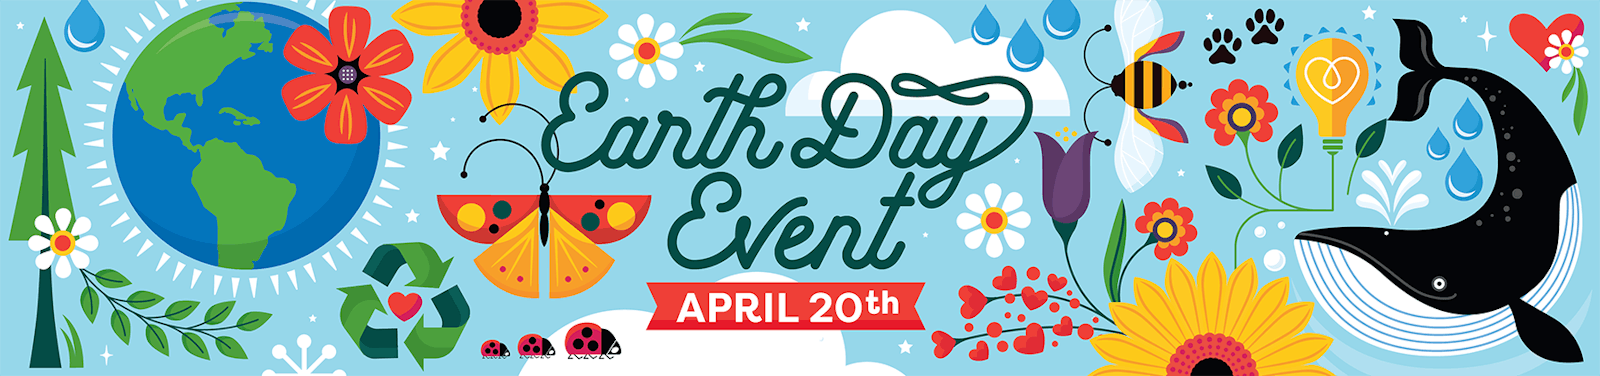 Earth Day Event - April 20th